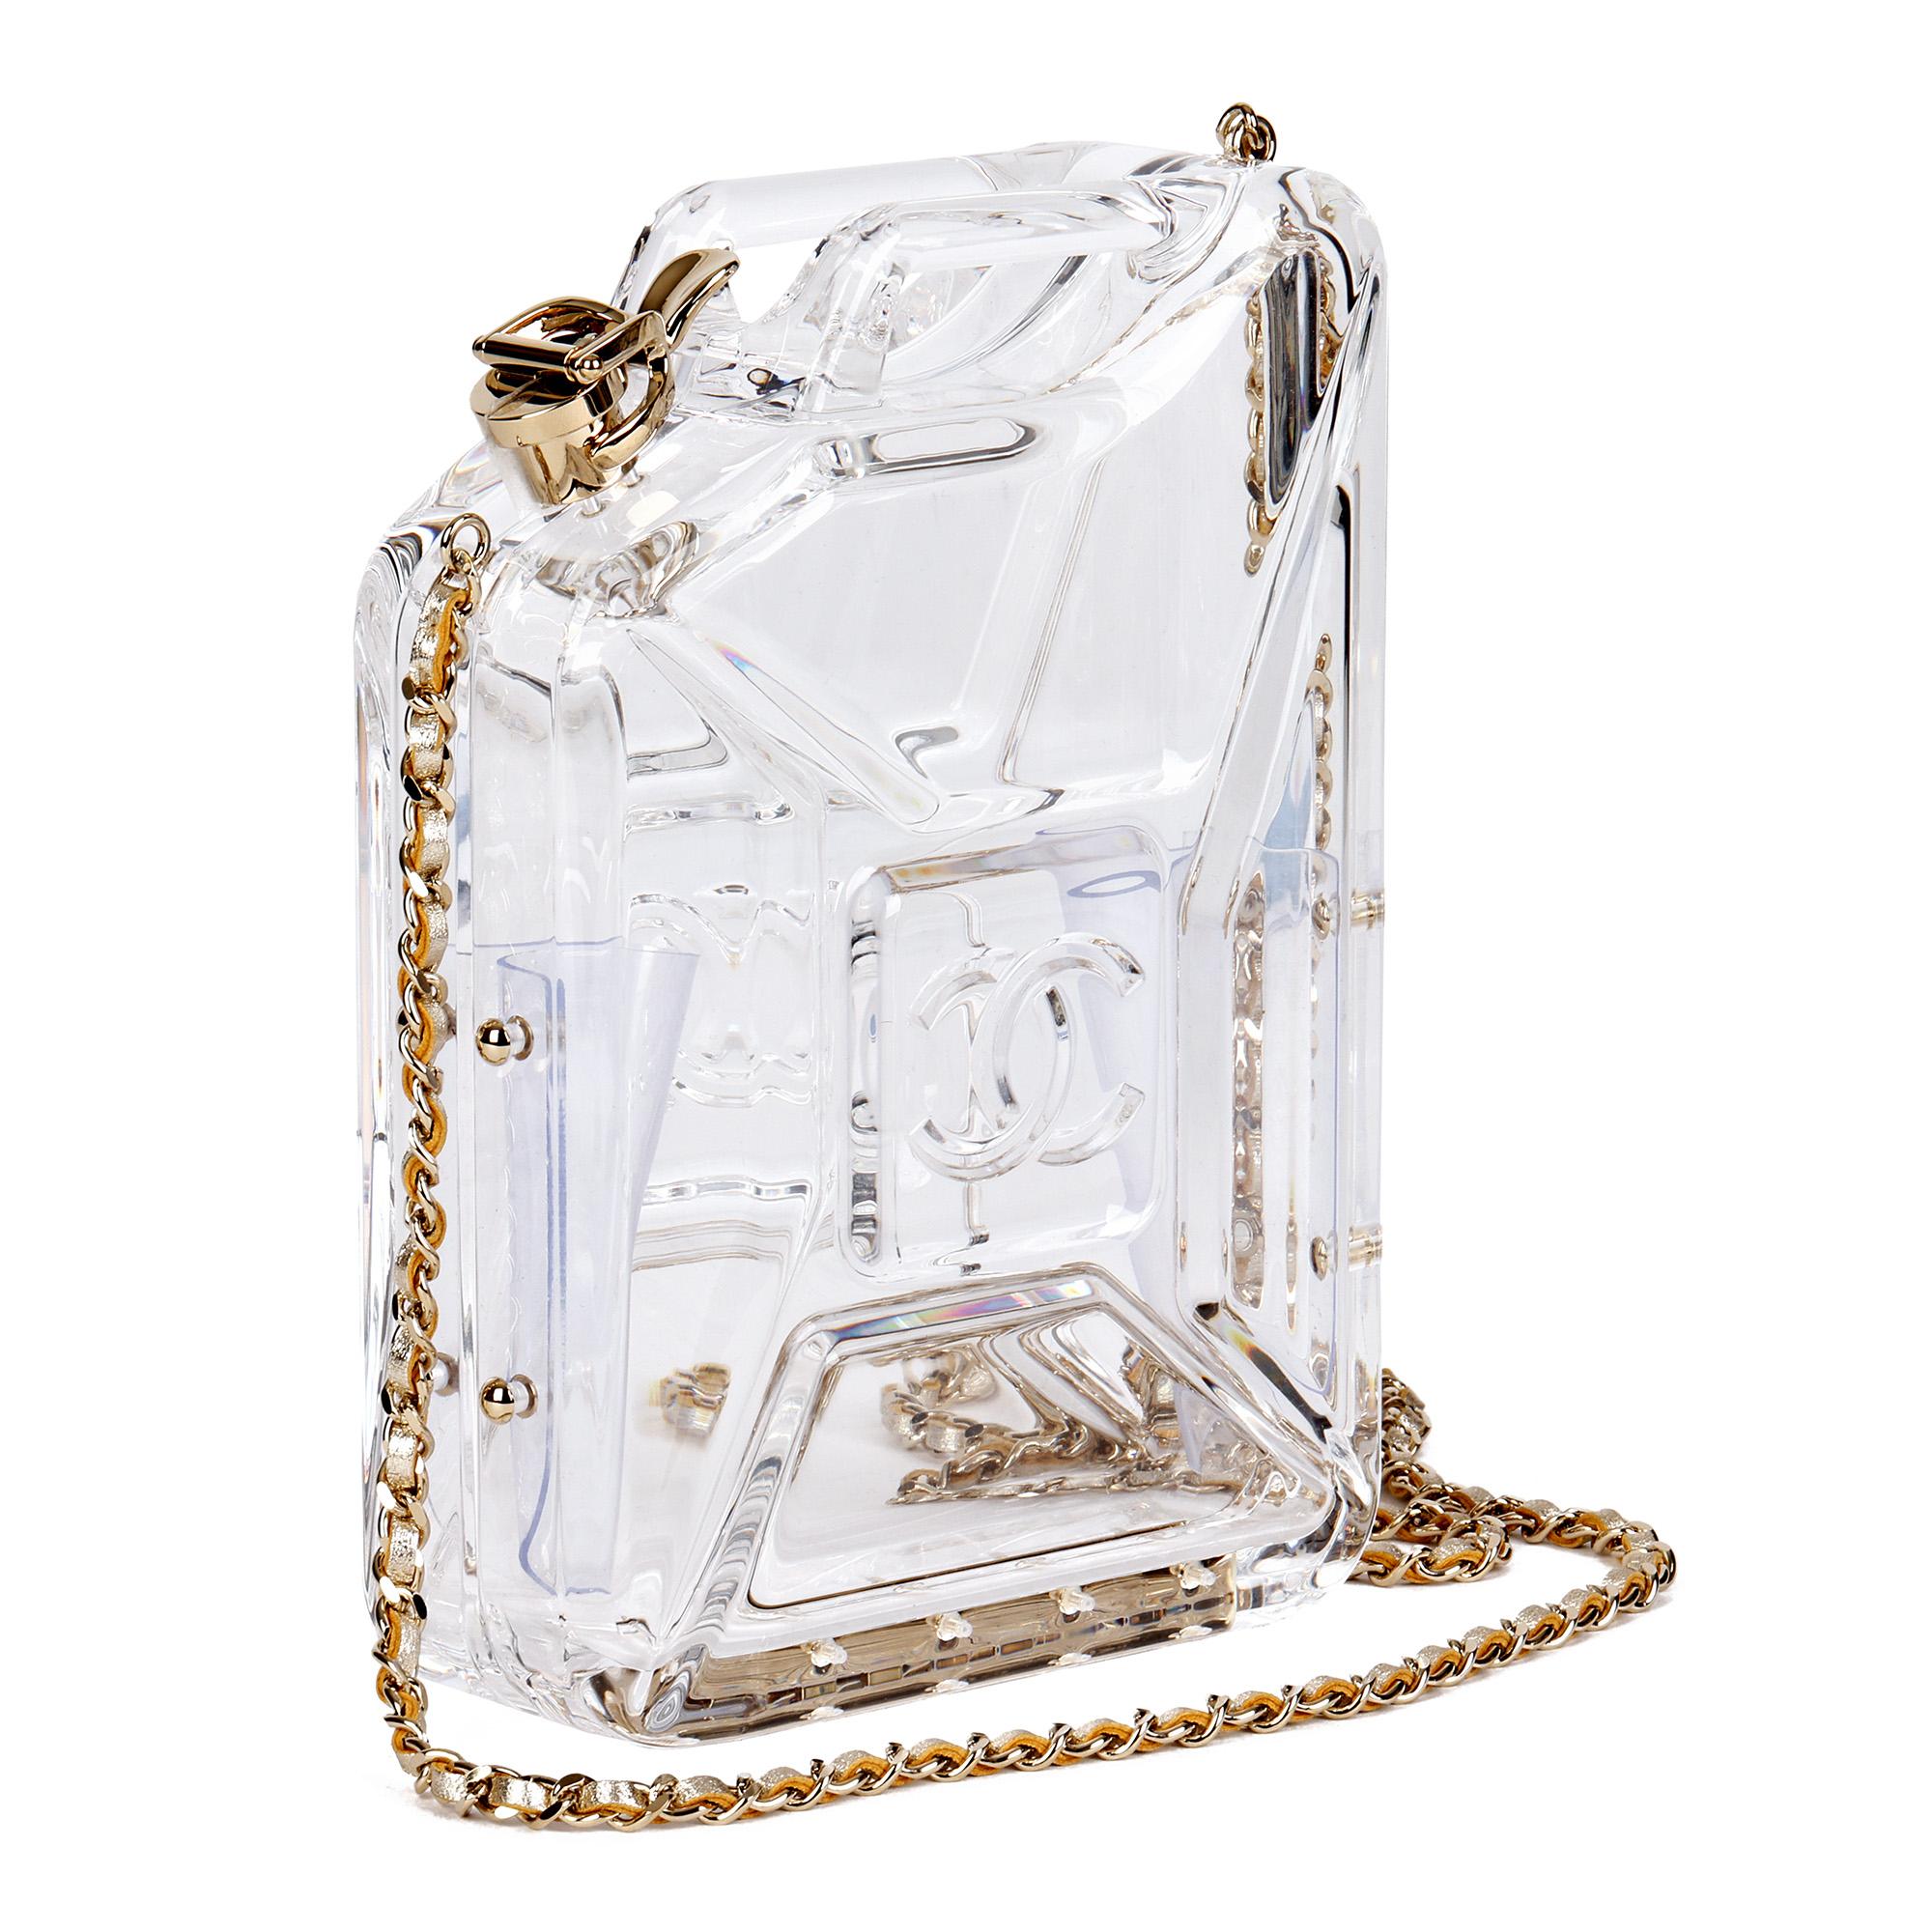 CHANEL
Clear Plexiglass Gas Canister Minaudière Clutch

Xupes Reference: CB577
Serial Number: 20564781
Age (Circa): 2015
Accompanied By: Chanel Dust Bag, Box, Authenticity Card
Authenticity Details: Authenticity Card, Serial Sticker (Made in